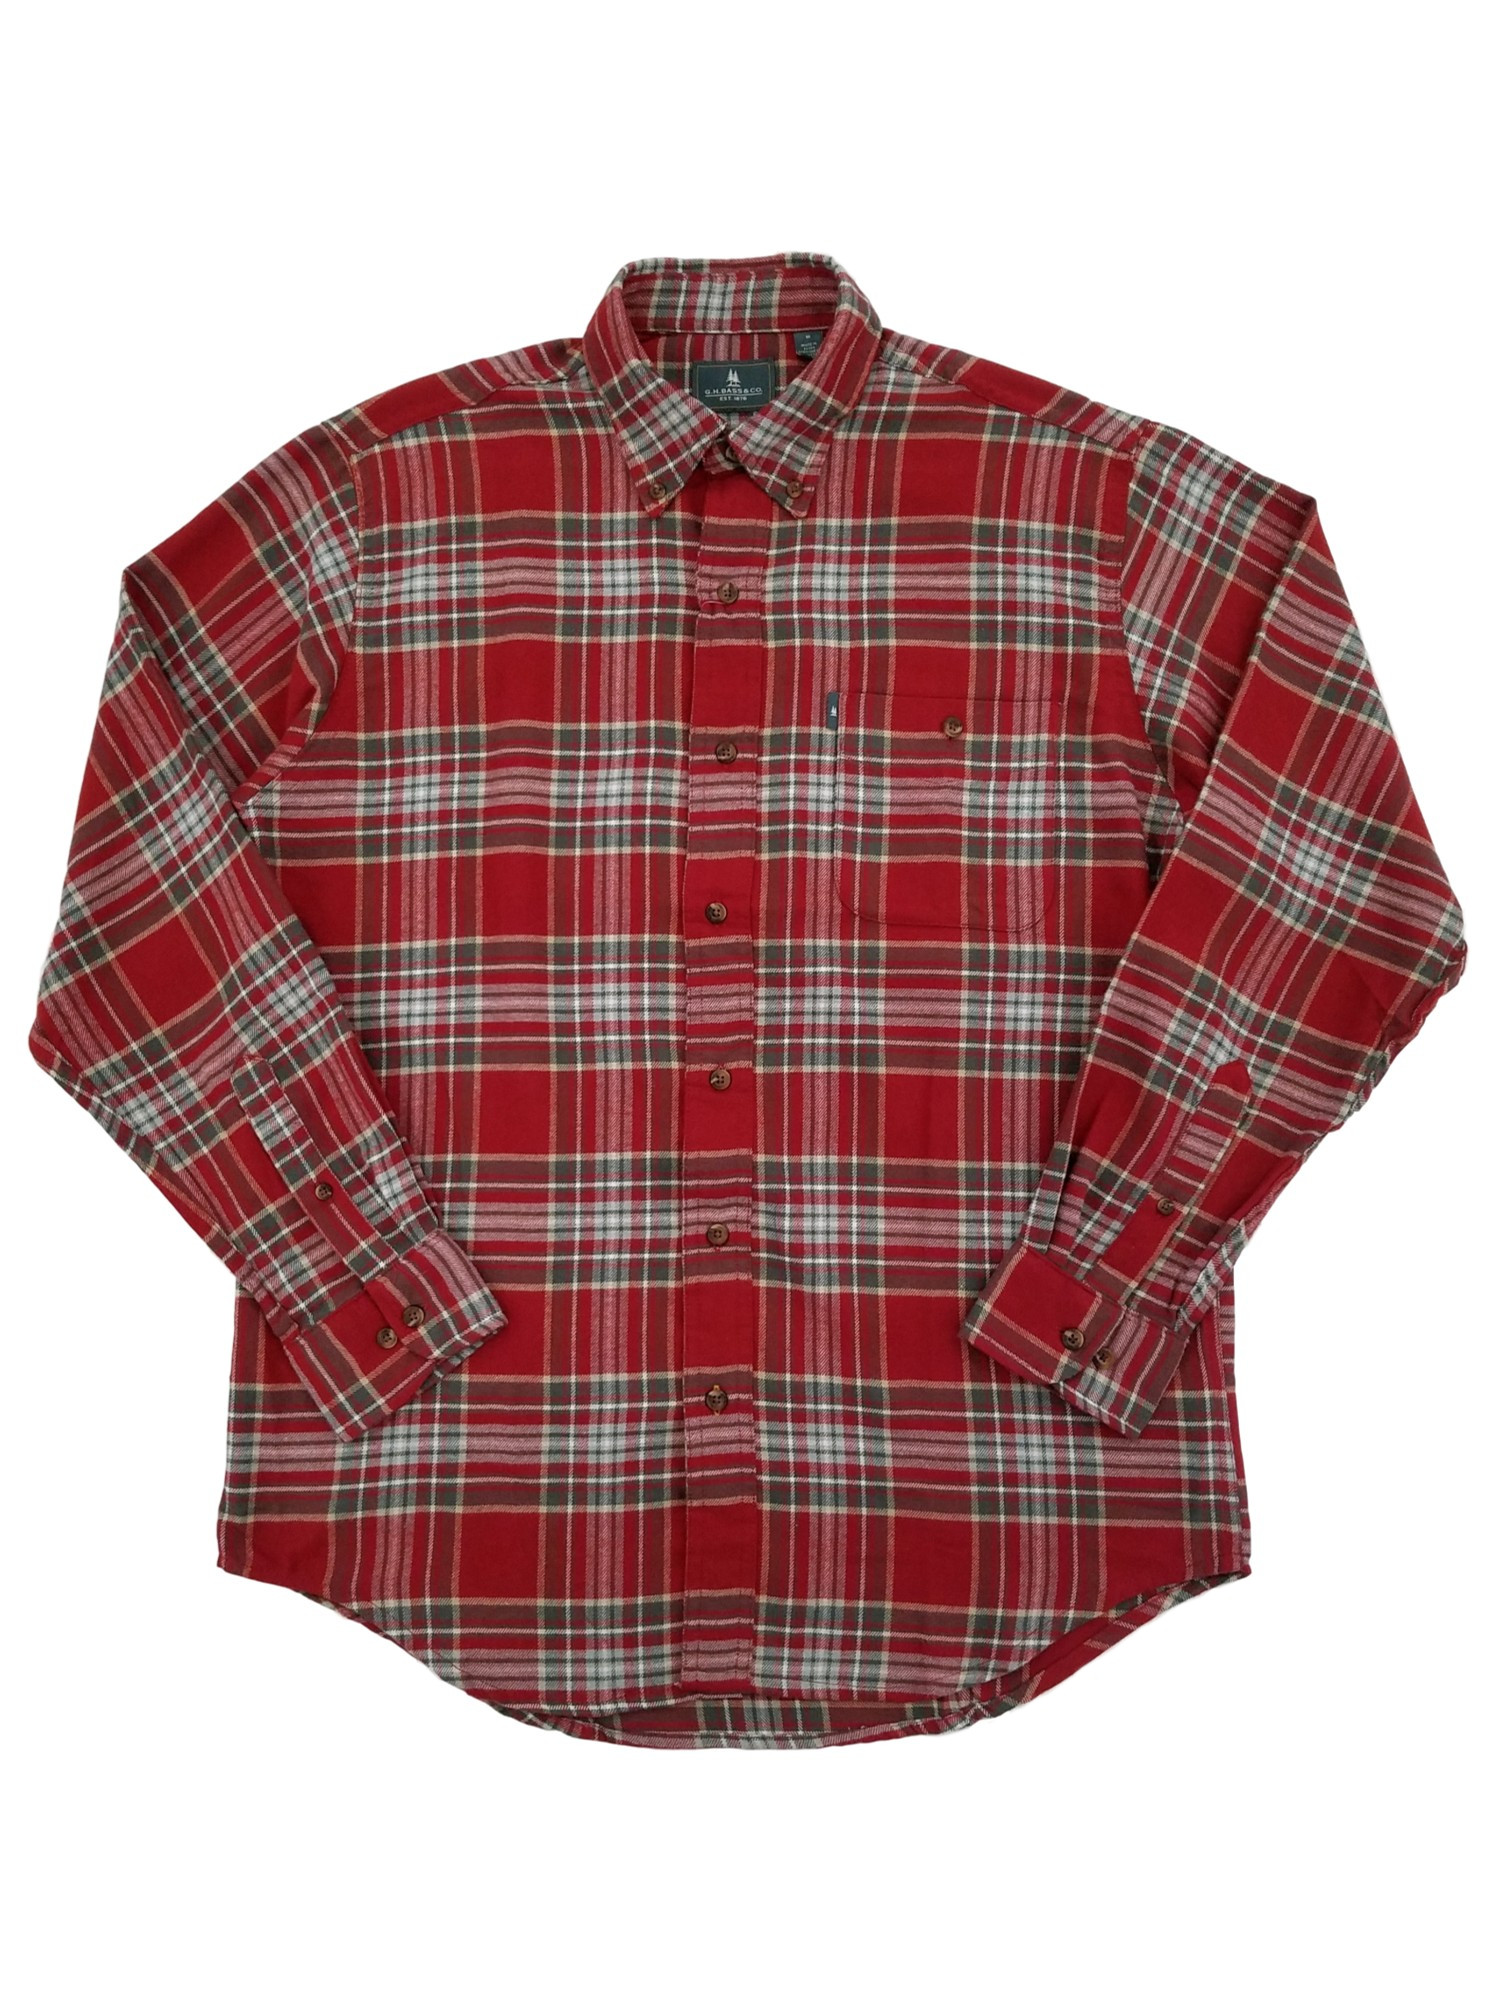 G.H. Bass & Co. Mens Red & Gray Plaid Flannel Long Sleeve Button-Down Shirt